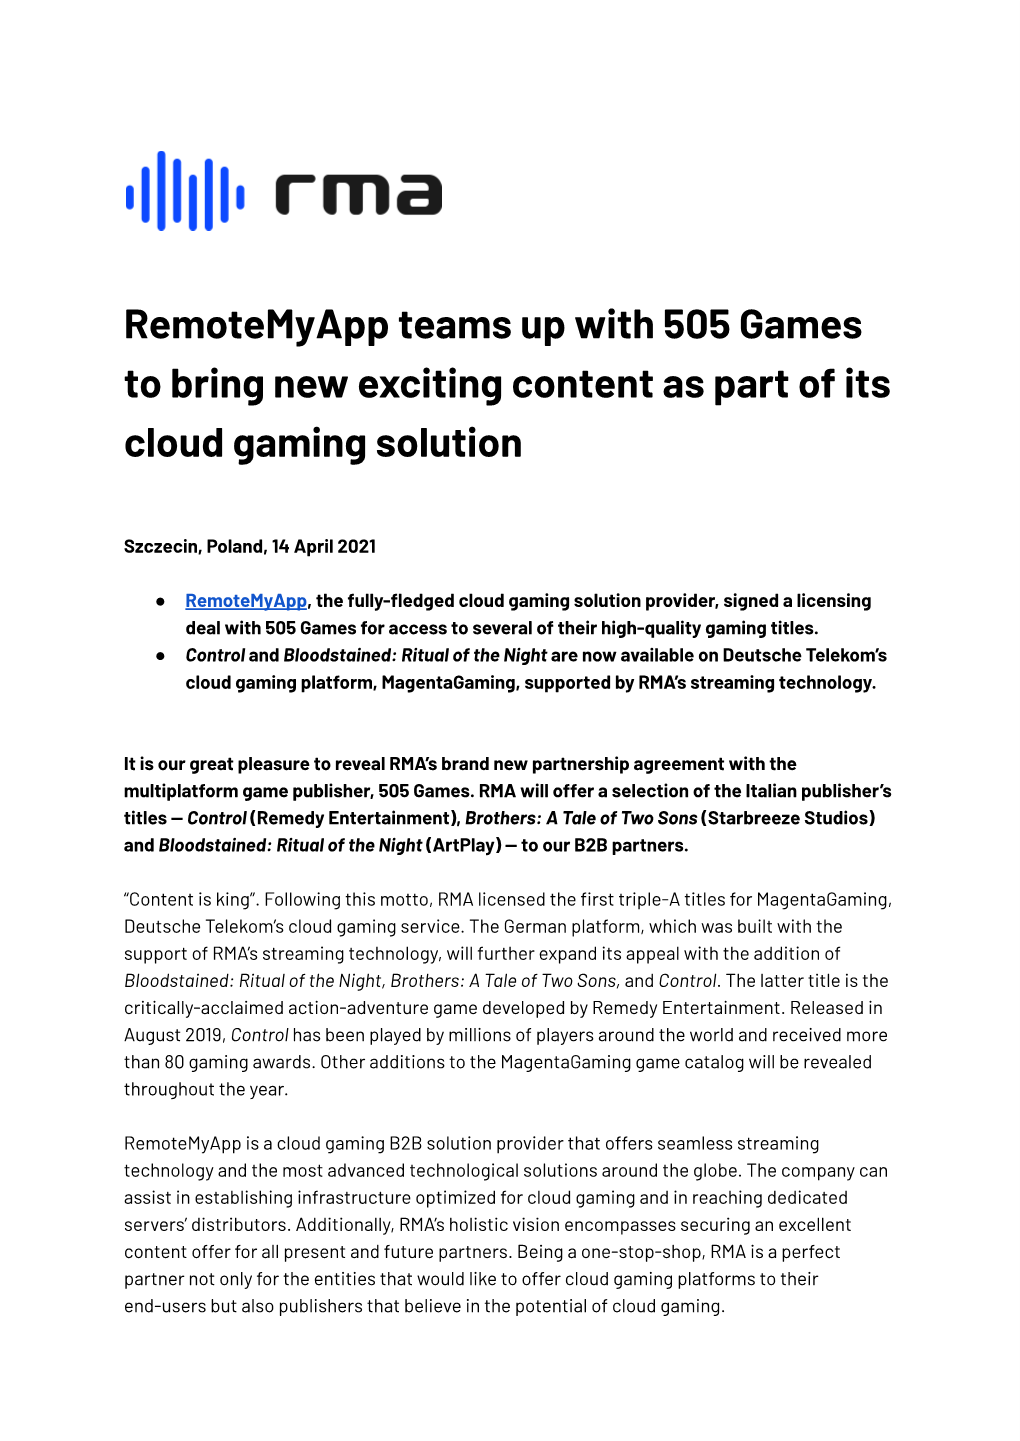 Remotemyapp Teams up with 505 Games to Bring New Exciting Content As Part of Its Cloud Gaming Solution